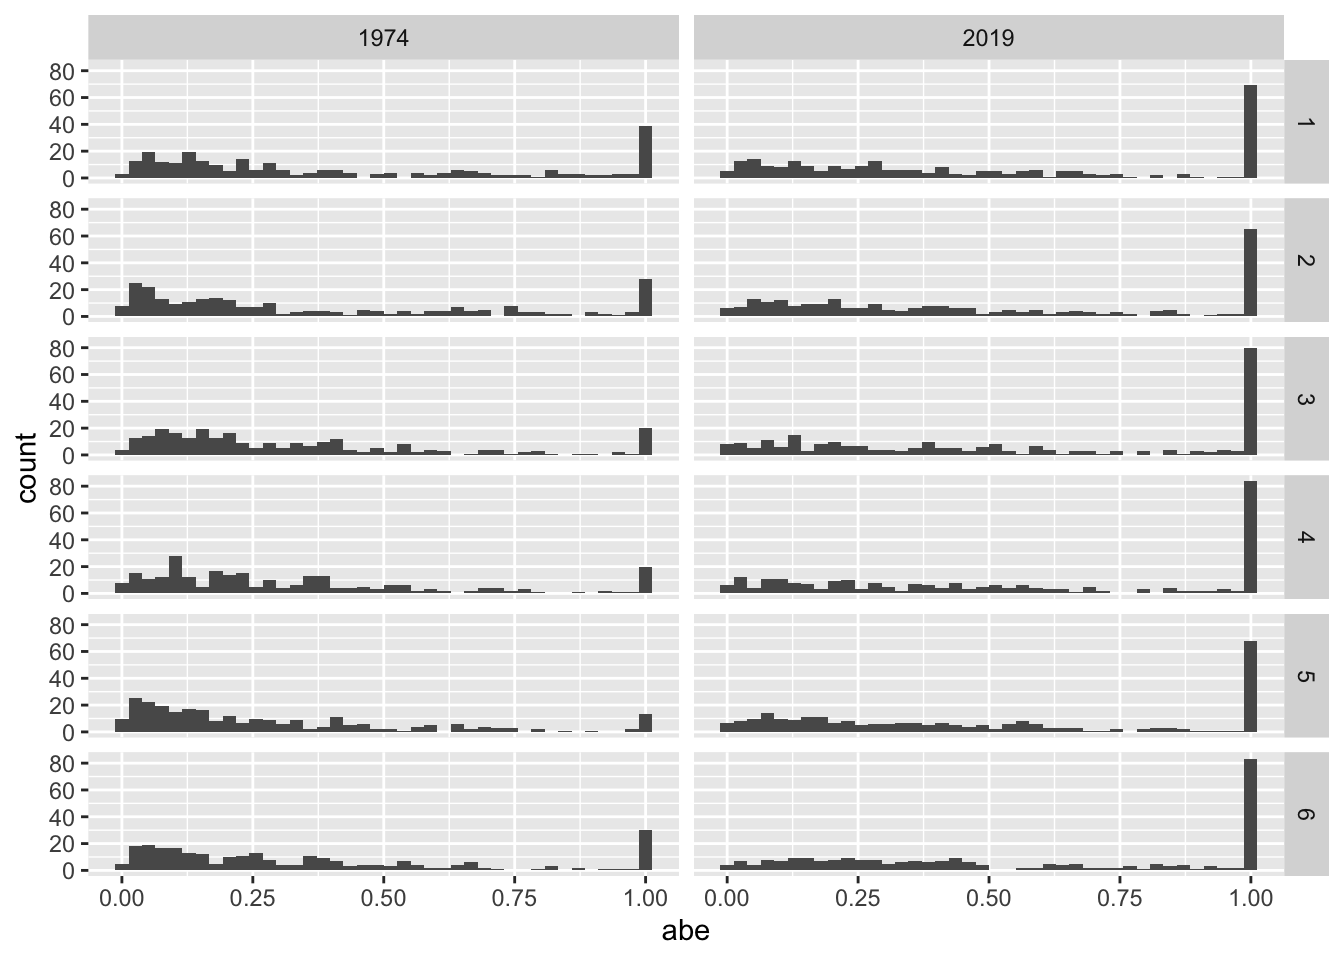 Histograms of abnormal earnings by model for six models discussed in the text by year (either 1974 or 2019). Plots show a concentration of observations at 1, with the concentration increasing from 1974 to 2019.